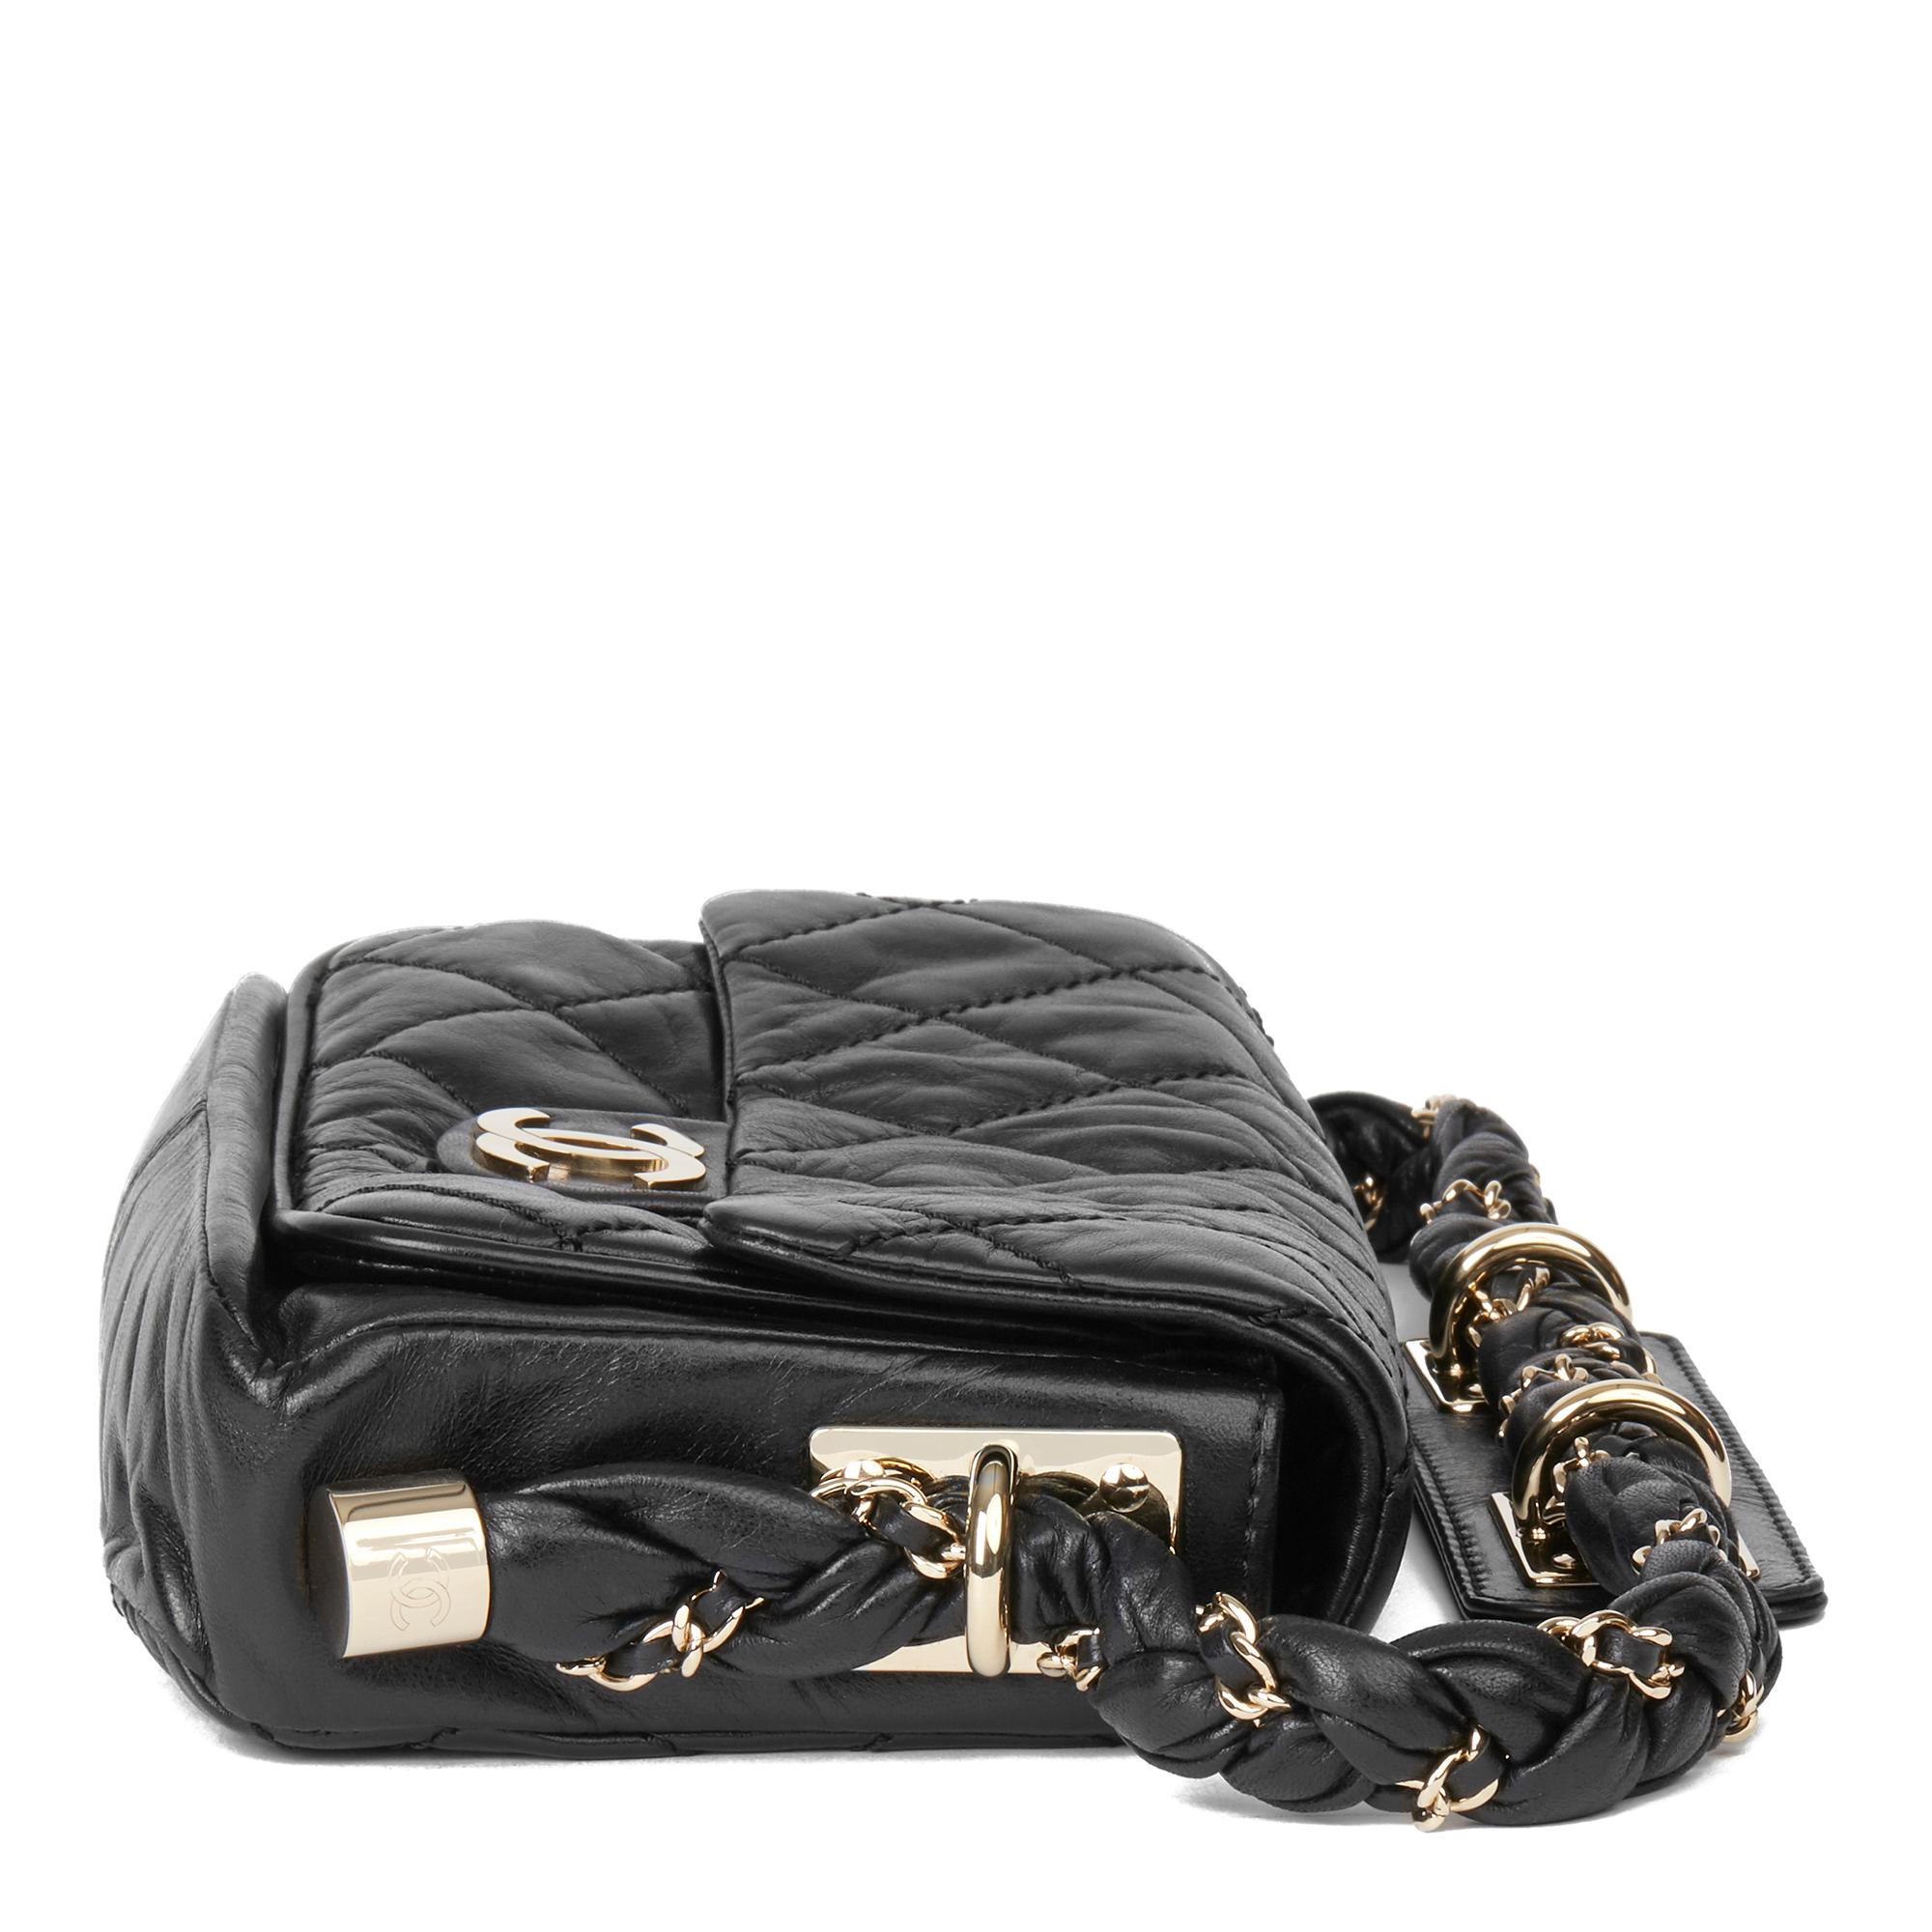 CHANEL
Black Quilted Aged Calfskin Leather Classic Single Flap Bag

Xupes Reference: HB3221
Serial Number: 11084887
Age (Circa): 2006
Accompanied By: Chanel Dust Bag, Box, Authenticity Card, Protective Felt
Authenticity Details: Serial Sticker,